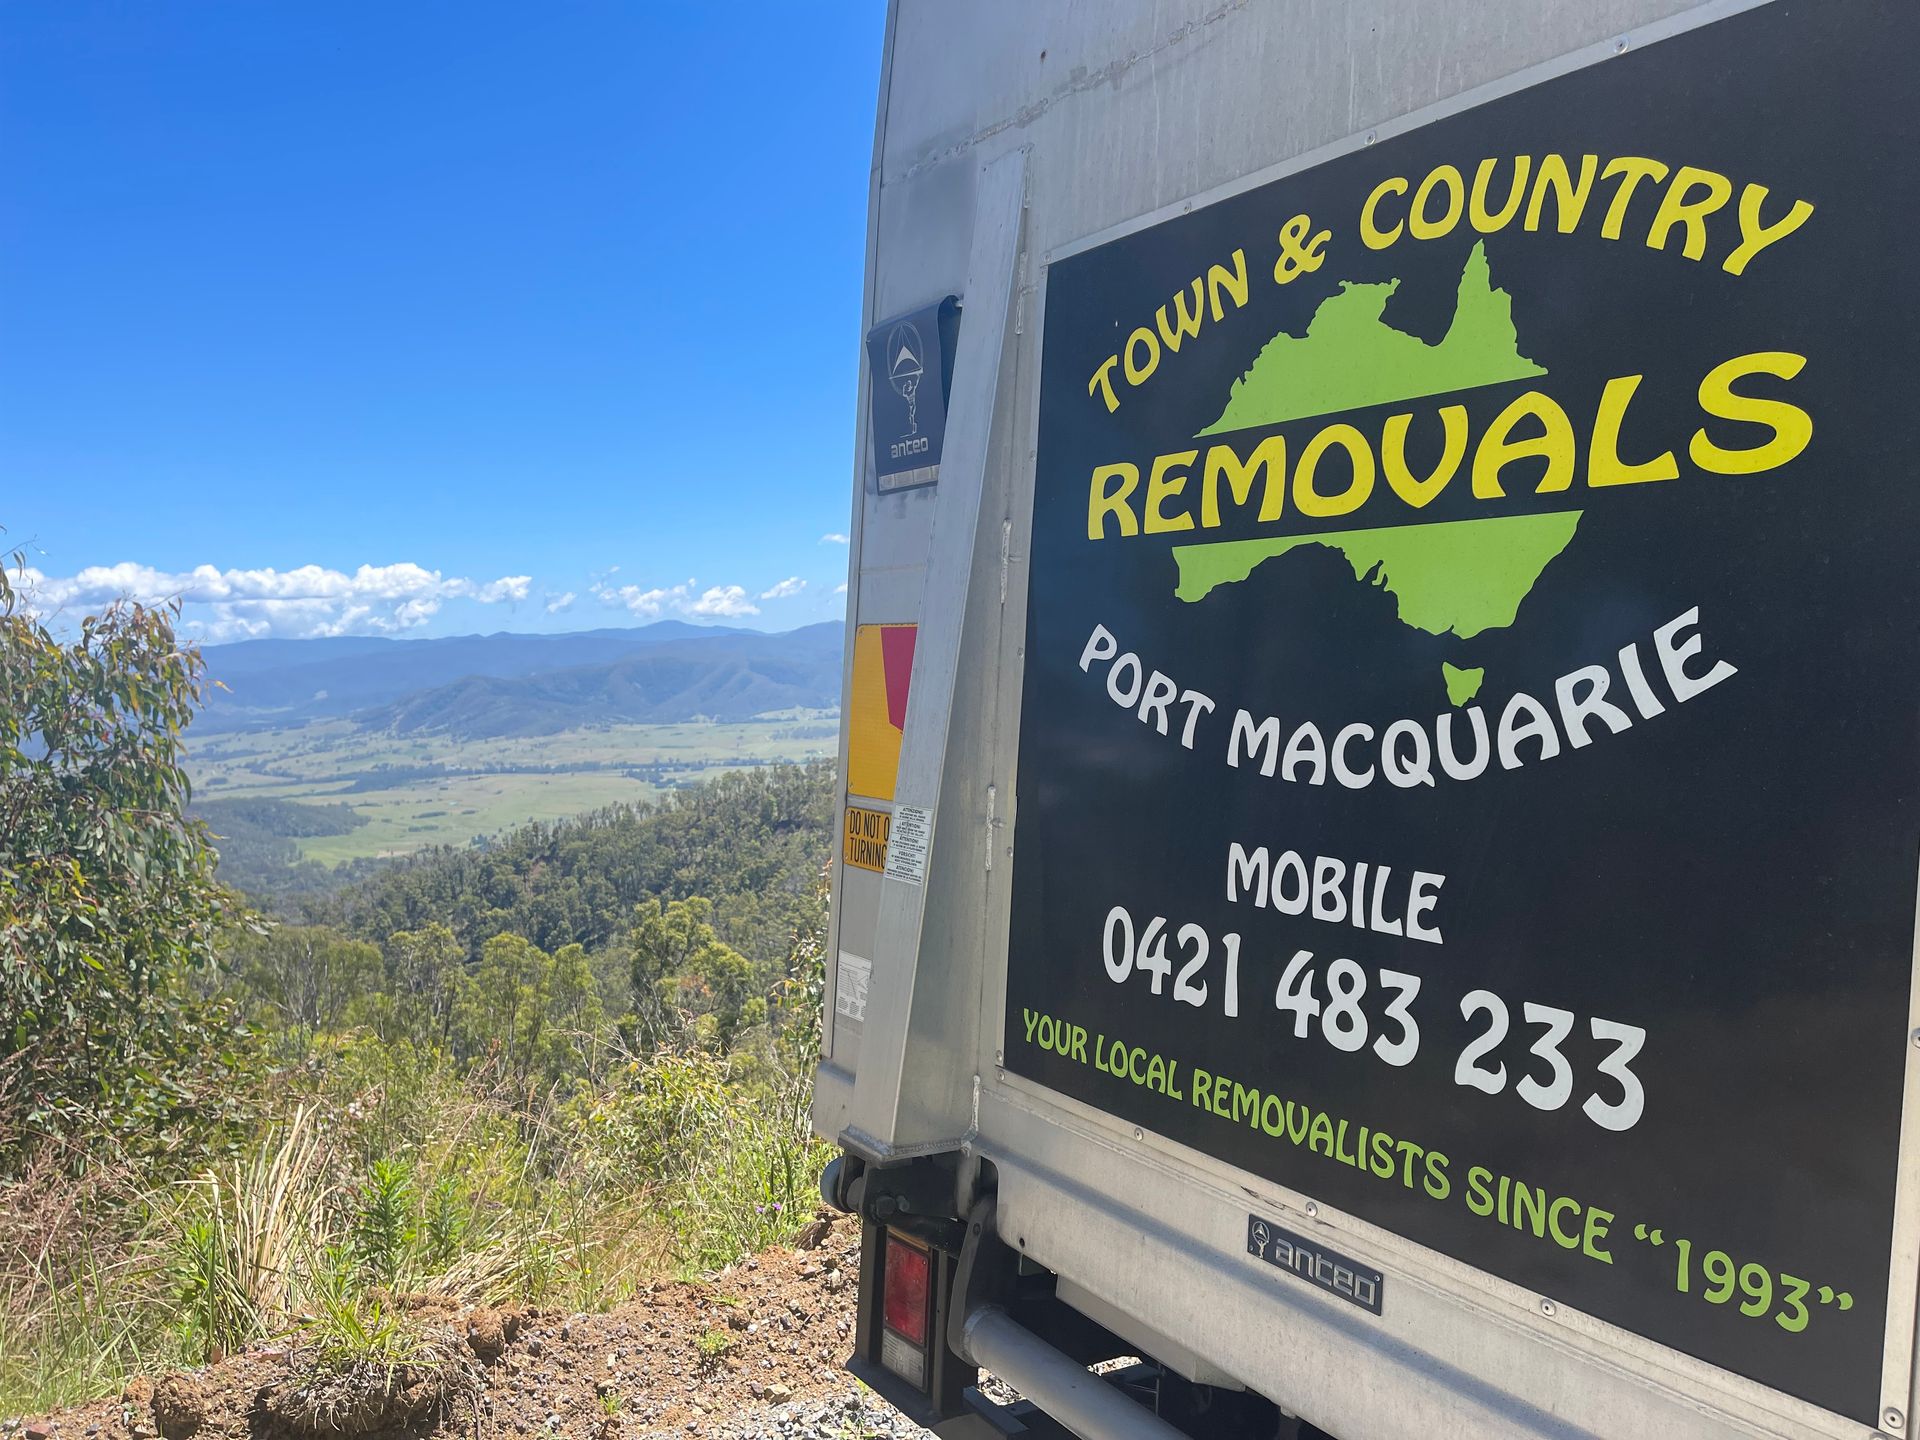 A Moving Truck Parked in a Hill with The View of the Land — Town & Country Removals In Port Macquarie, NSW